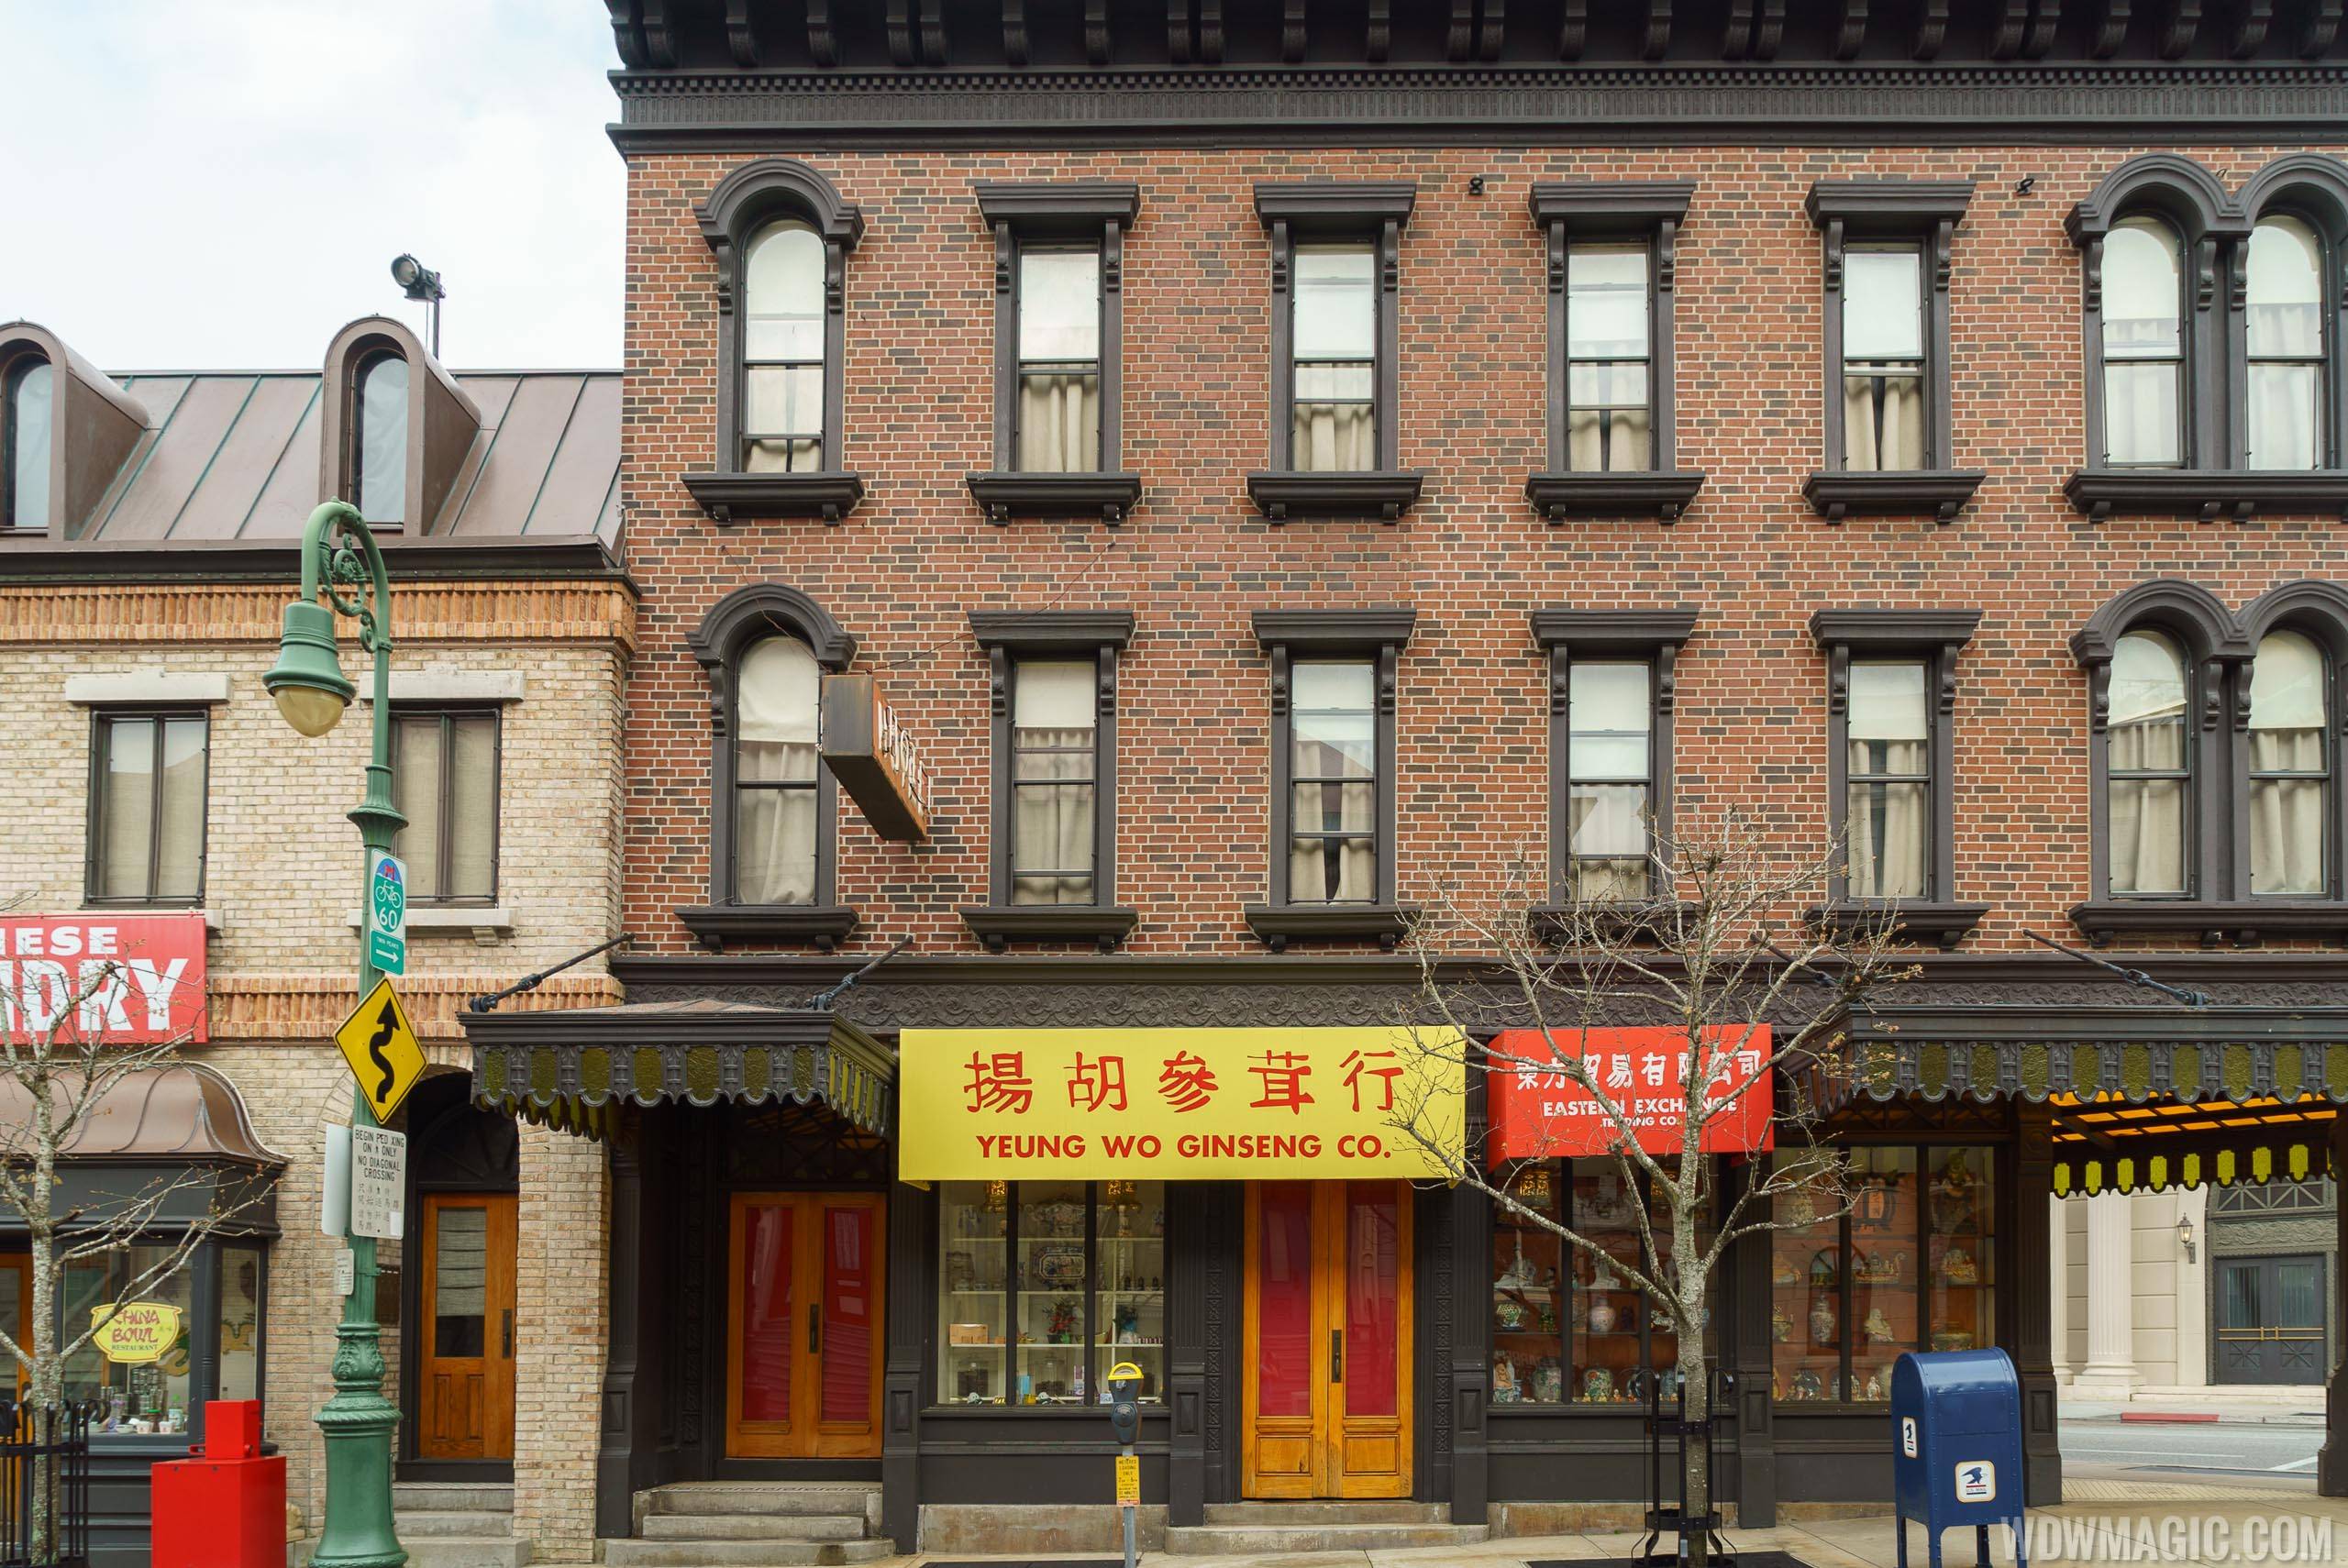 Streets of America facades - San Fransisco China Town